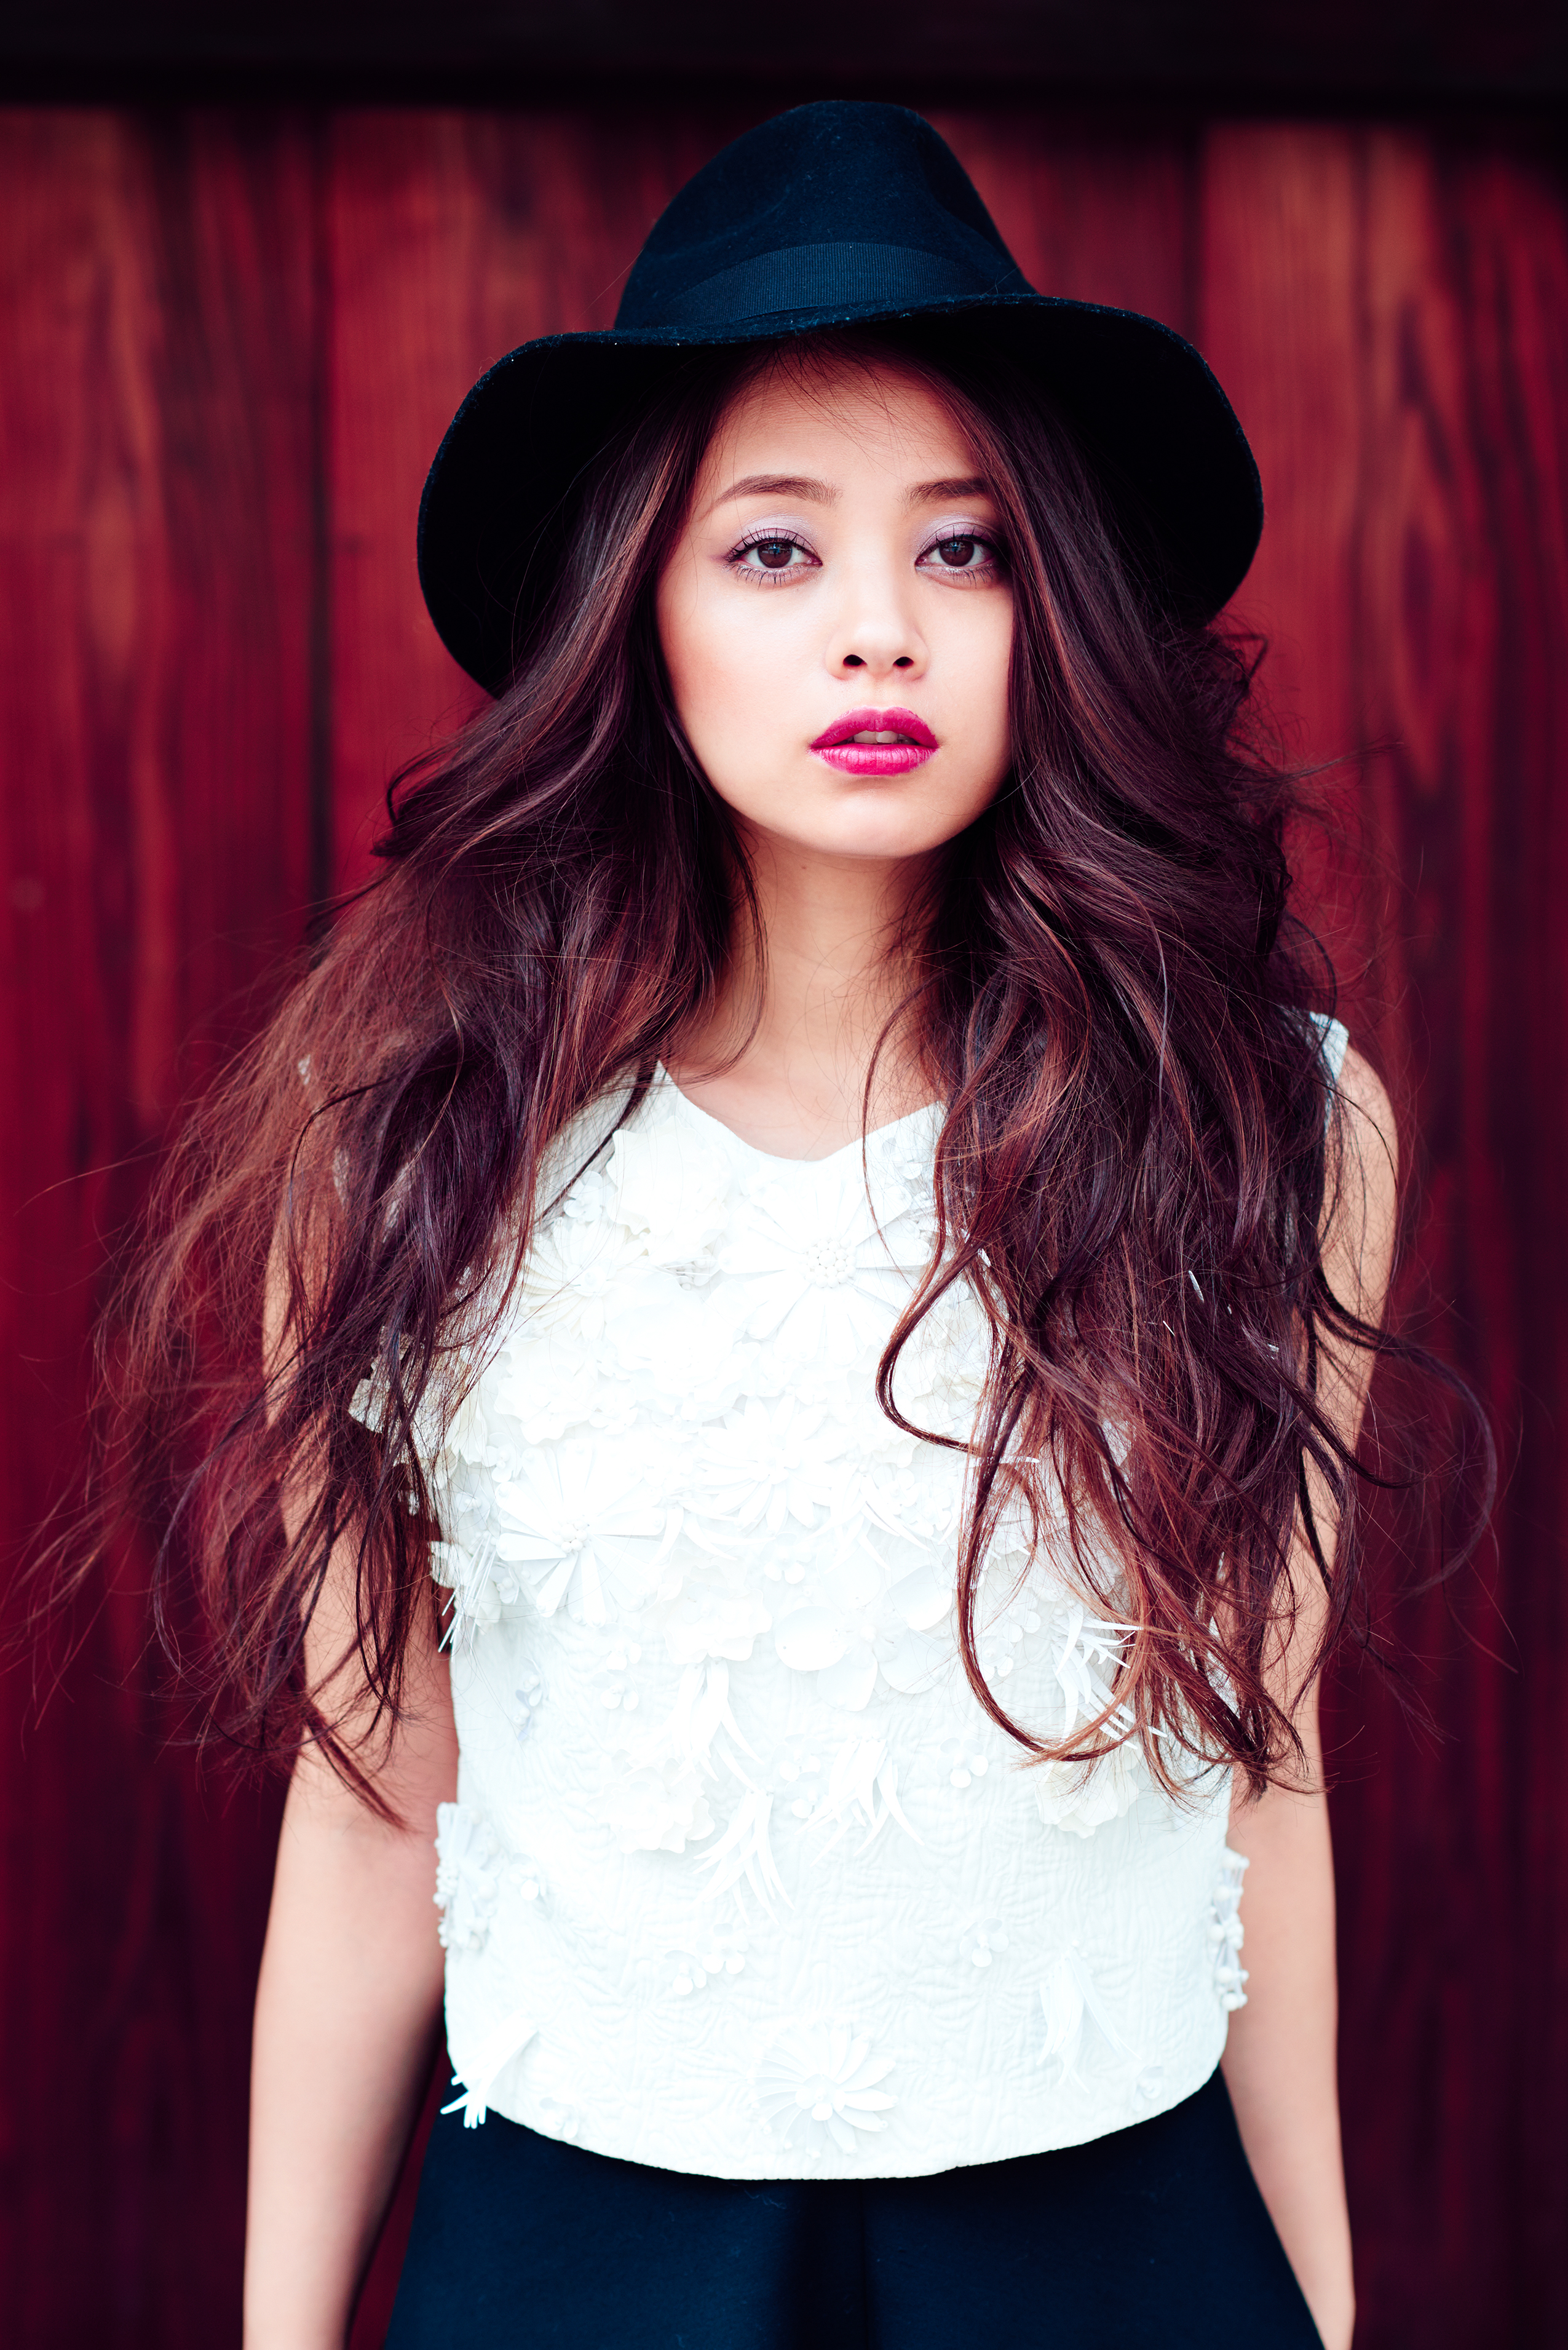 Mamiko for Bellona Agency Editorial in Flannel Magazine { Hudson Valley Headshot Photographer }